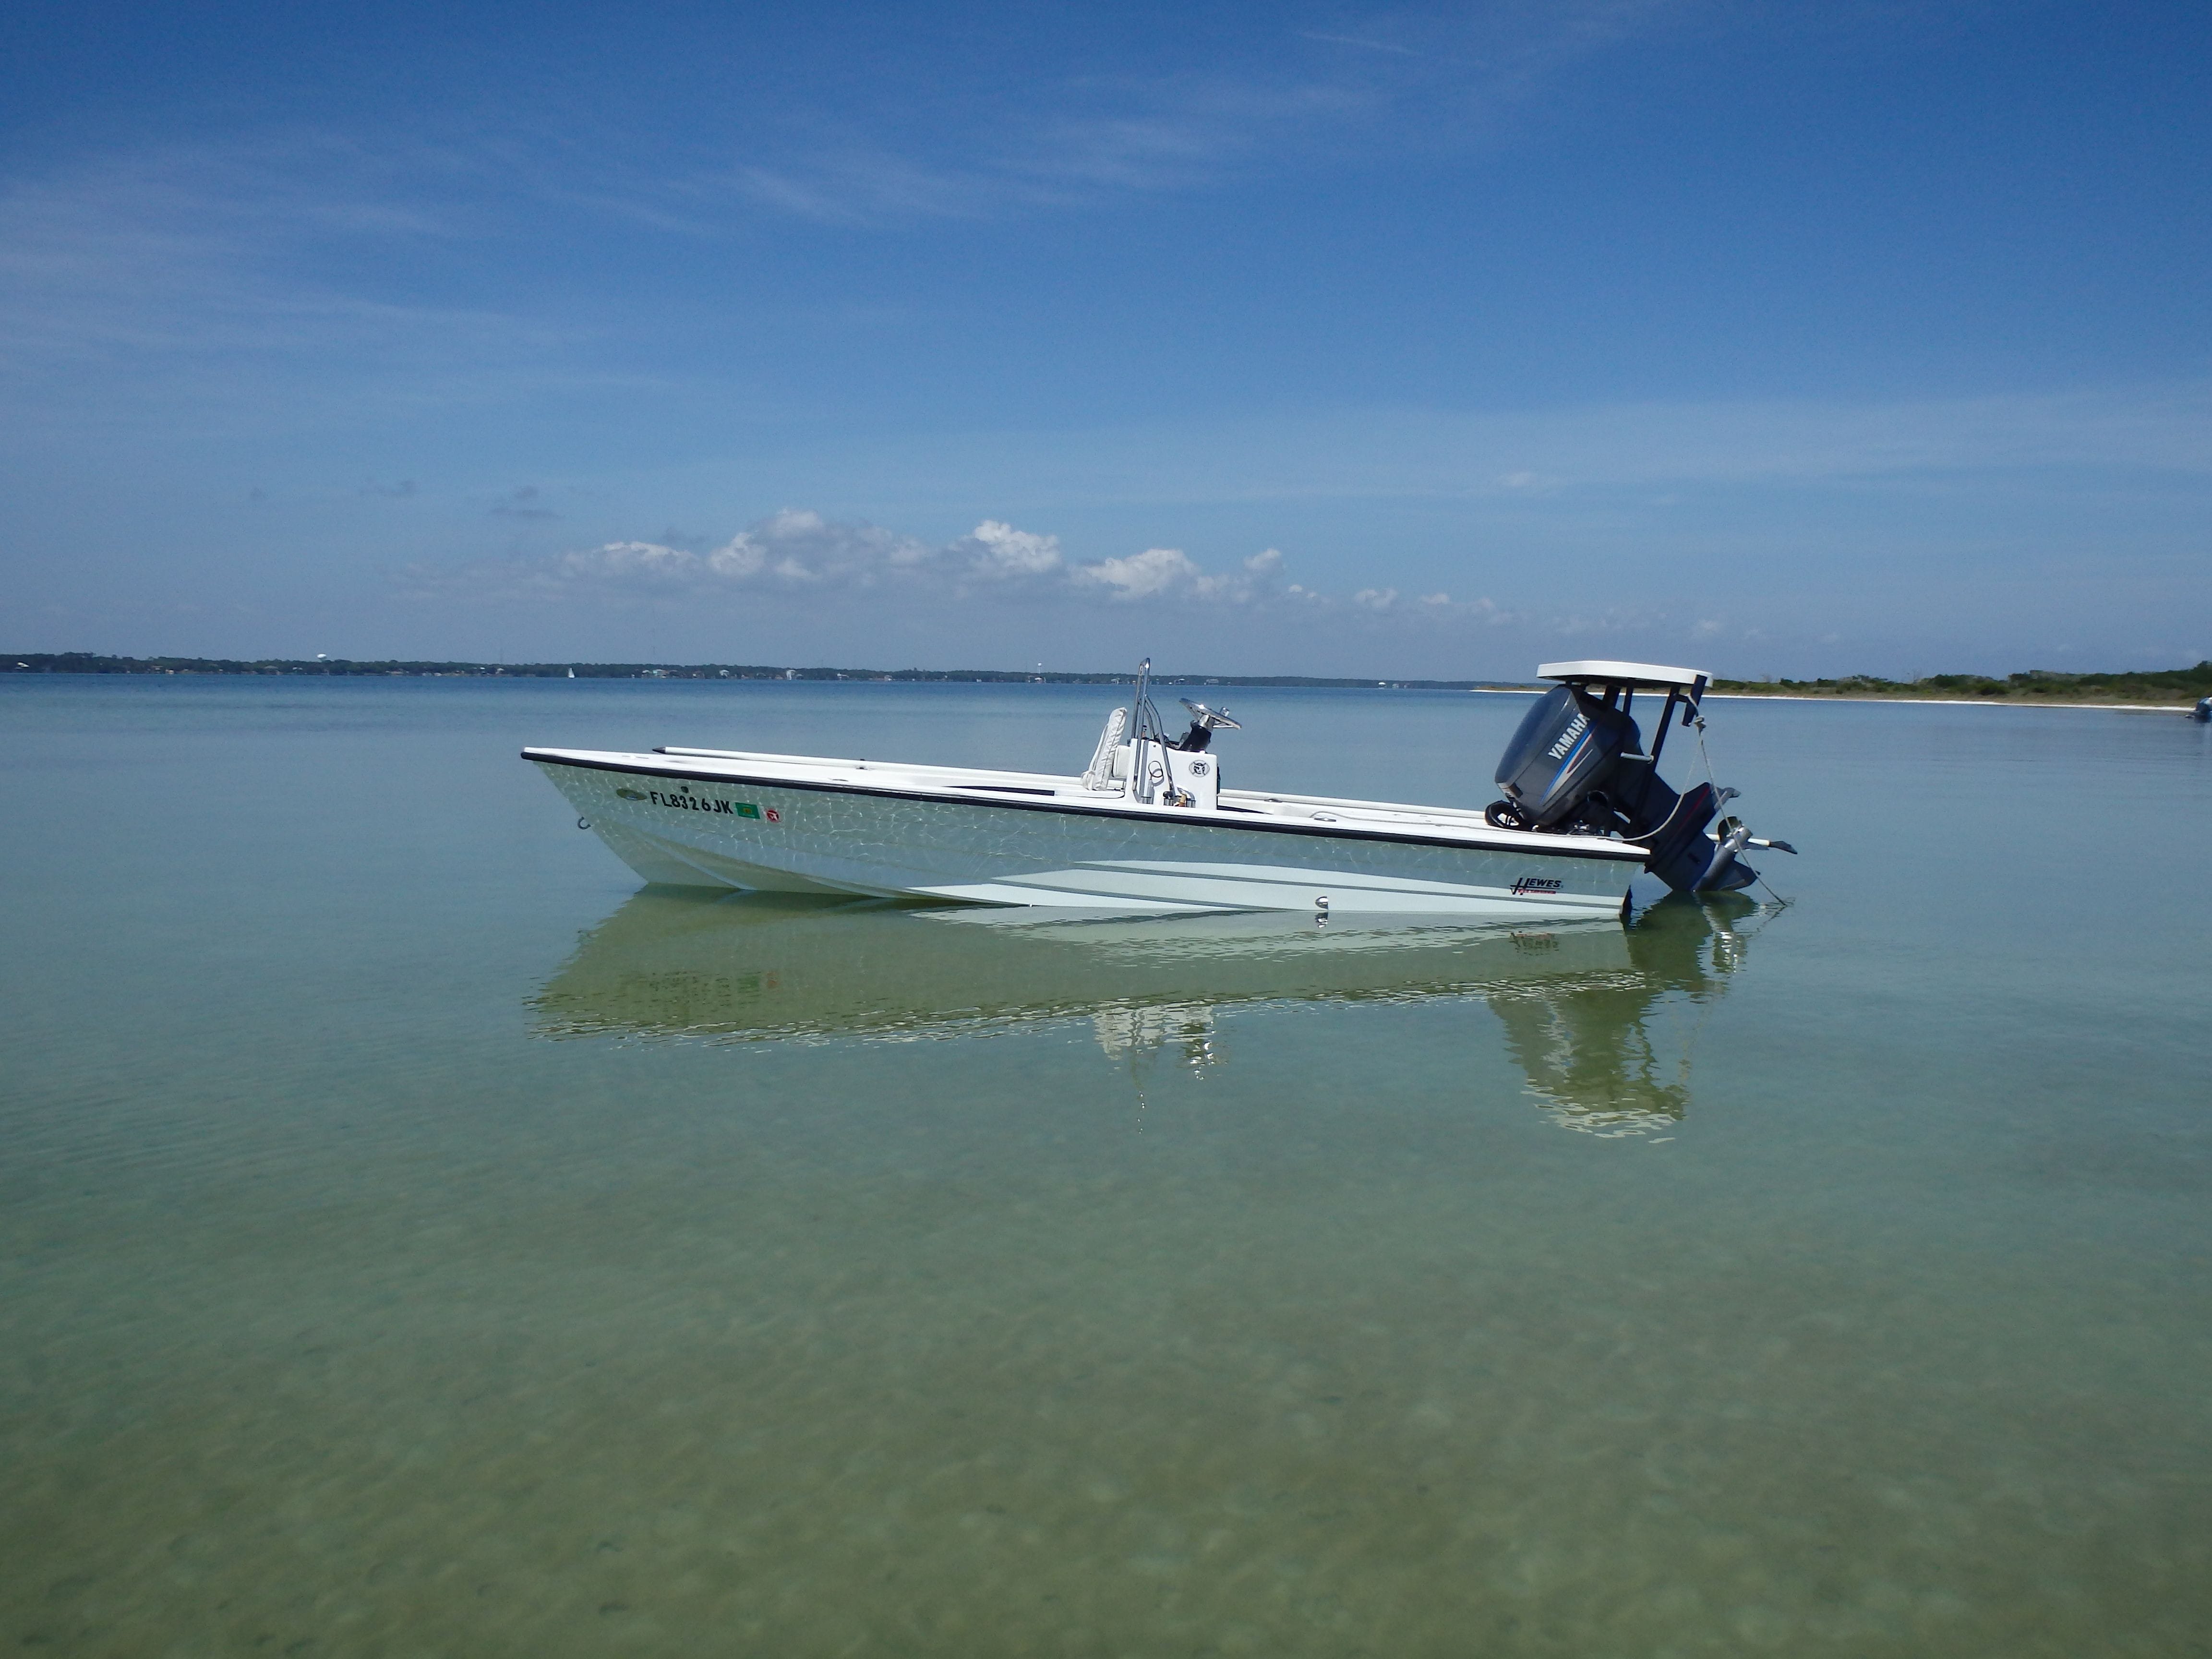 Hewes redfisher 18 flats boat in calm shallow water